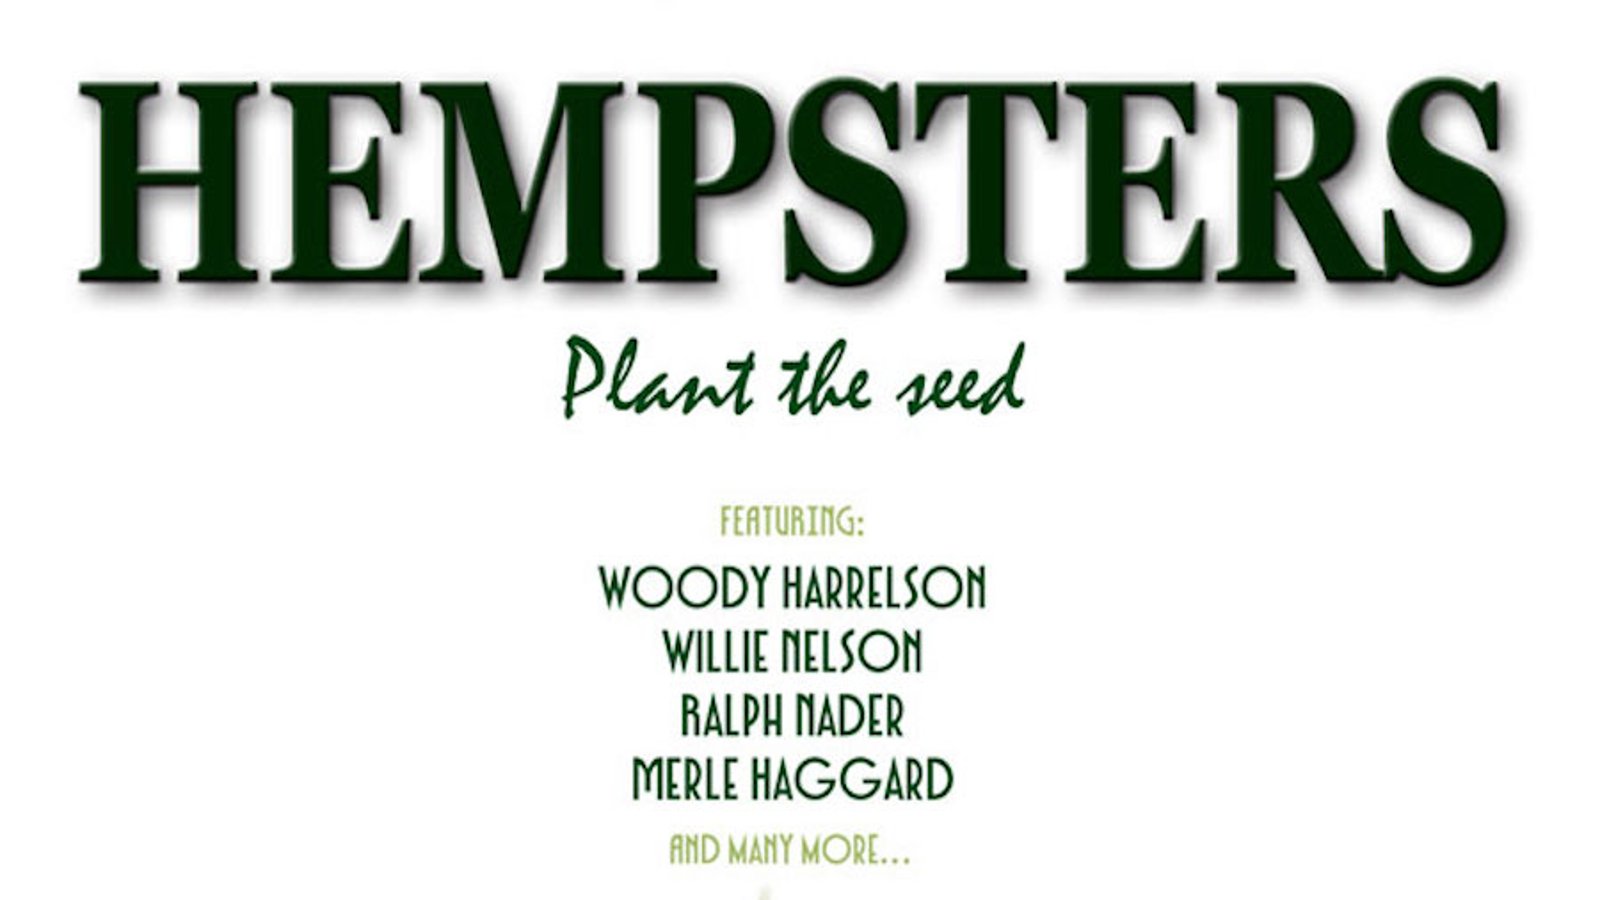 Hempsters: Plant the Seed - The Fight to Legalize Industrial Hemp in the U.S.